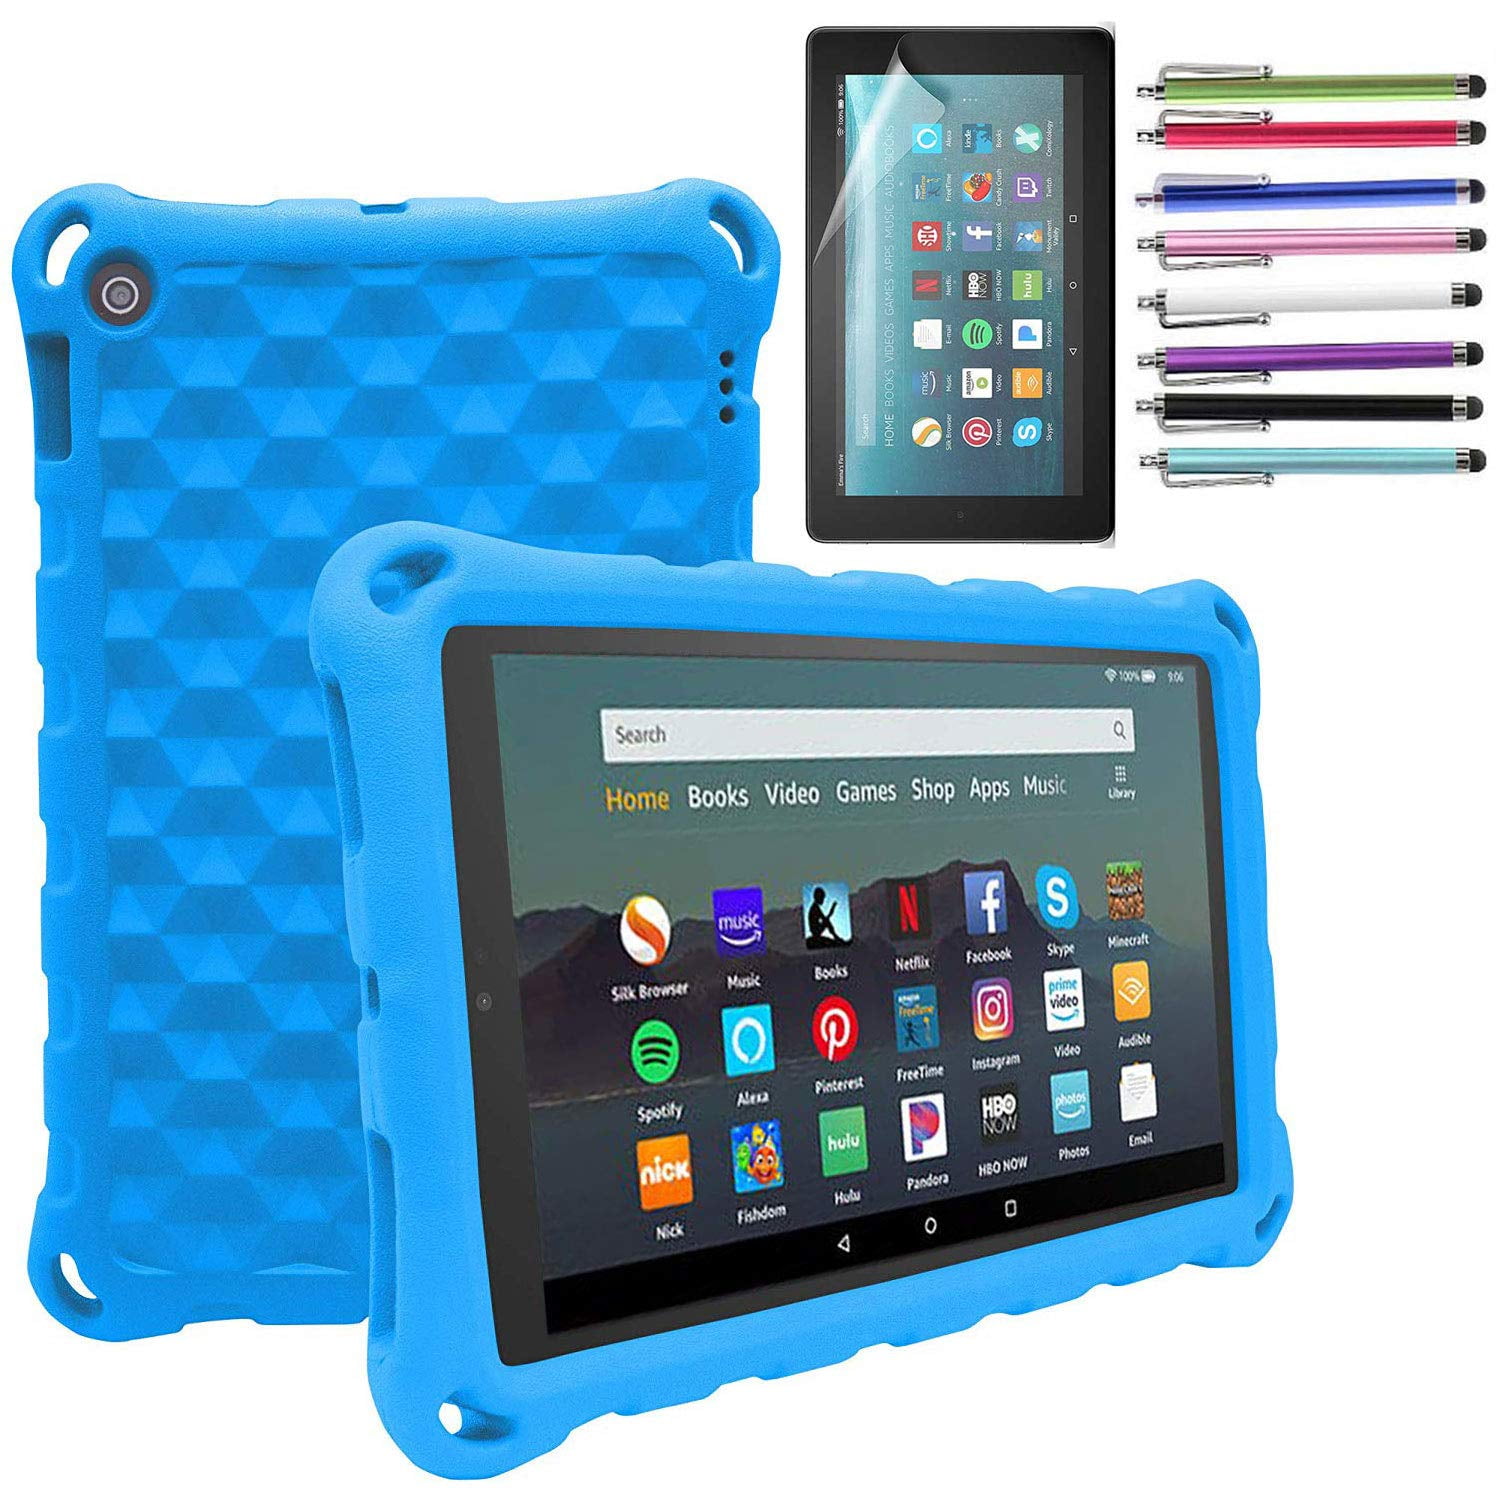 EpicGadget Case for Amazon Fire HD 10 Inch Tablet (9th/7th Generation, 2019/2017 Released